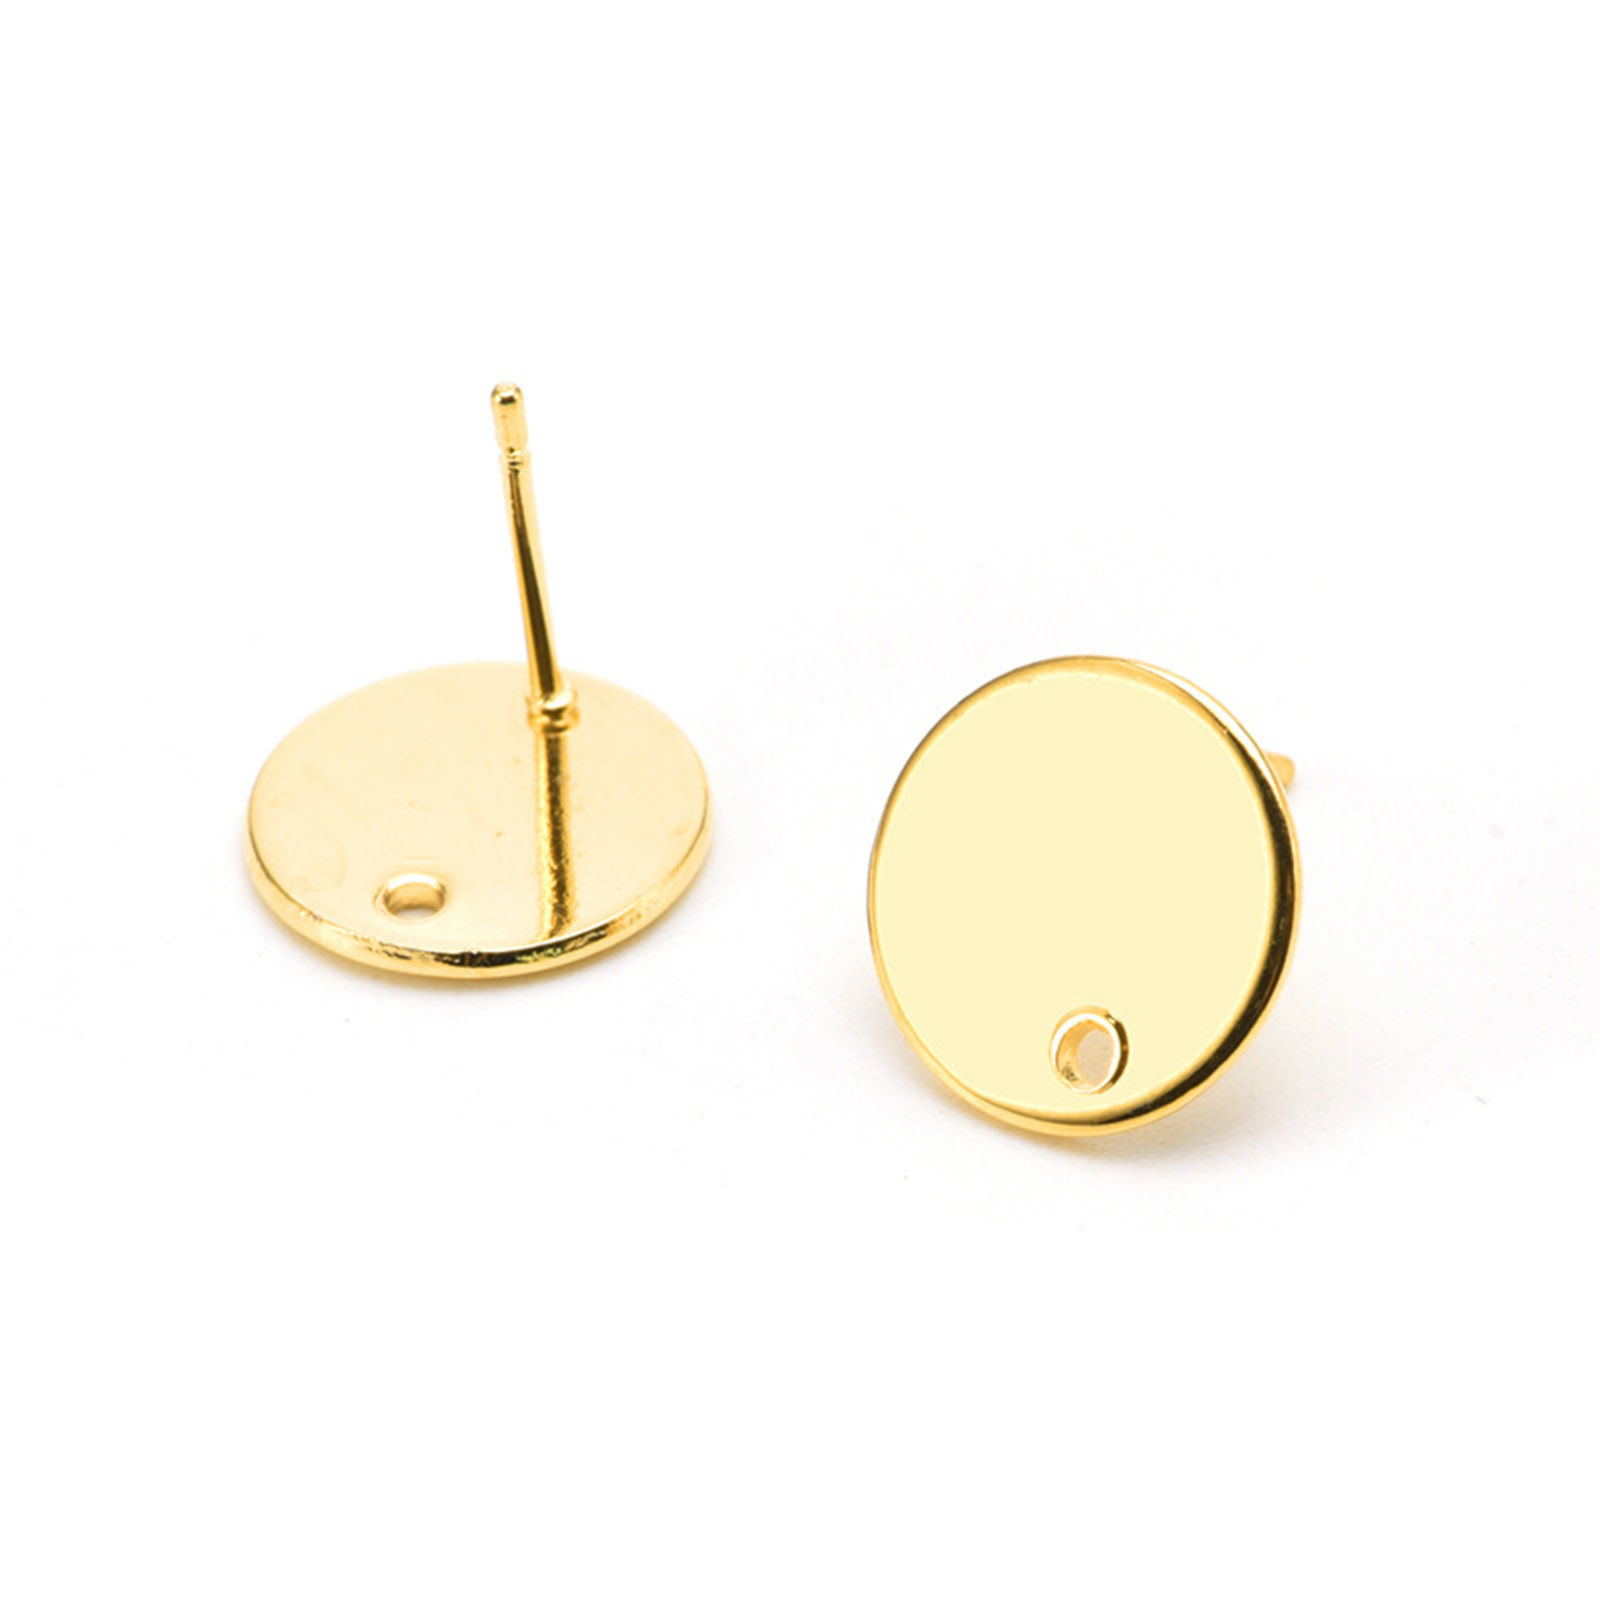 Picture of Stainless Steel Ins Style Ear Post Stud Earrings Round Gold Plated With Loop 12mm Dia., Post/ Wire Size: (20 gauge), 1 Piece